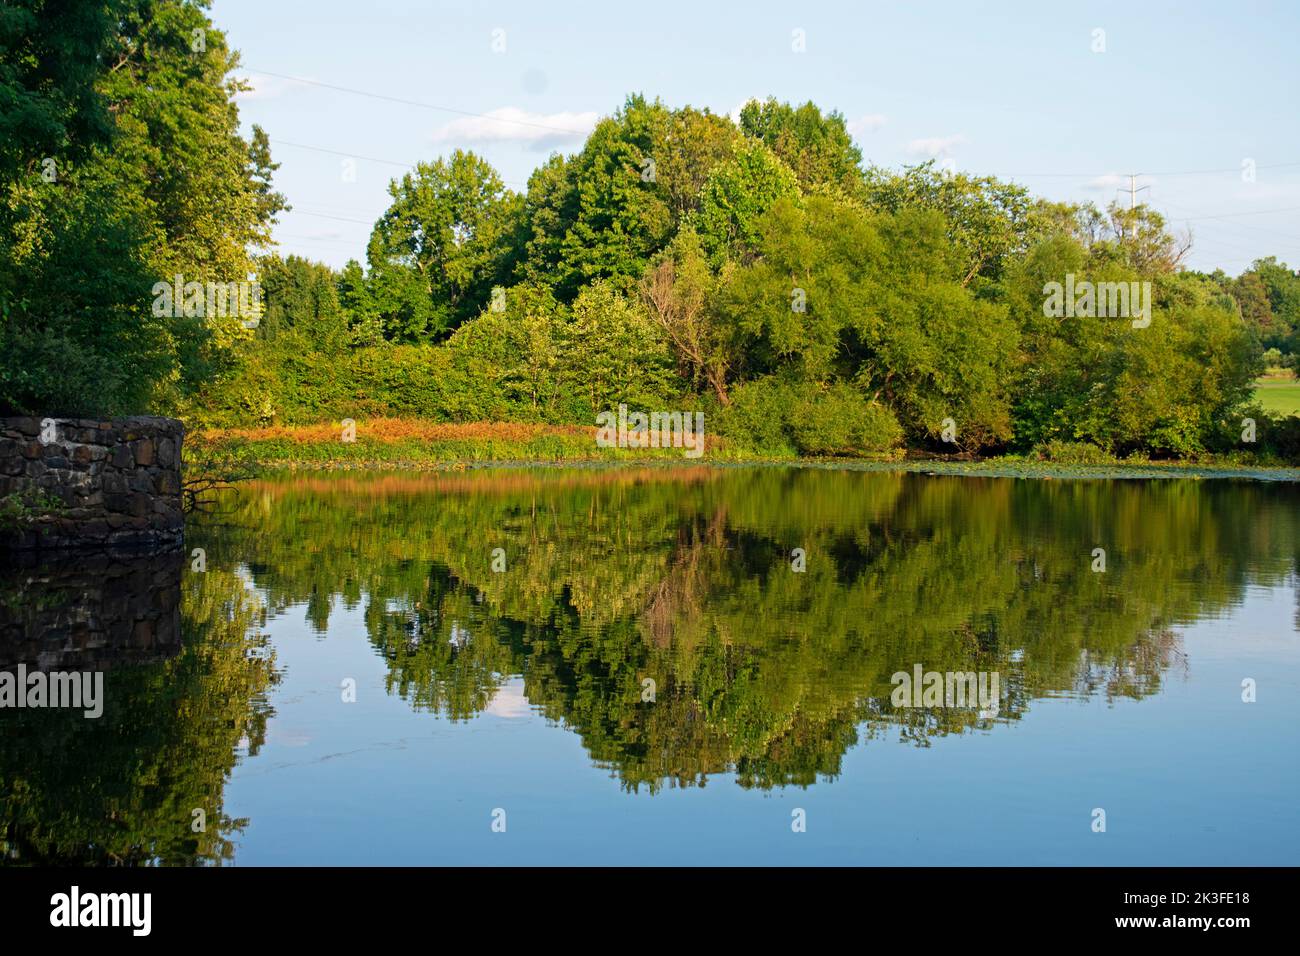 Reflections of trees and leaves in lake at Davidson's Mill Pond Park on a bright sunny day -15 Stock Photo